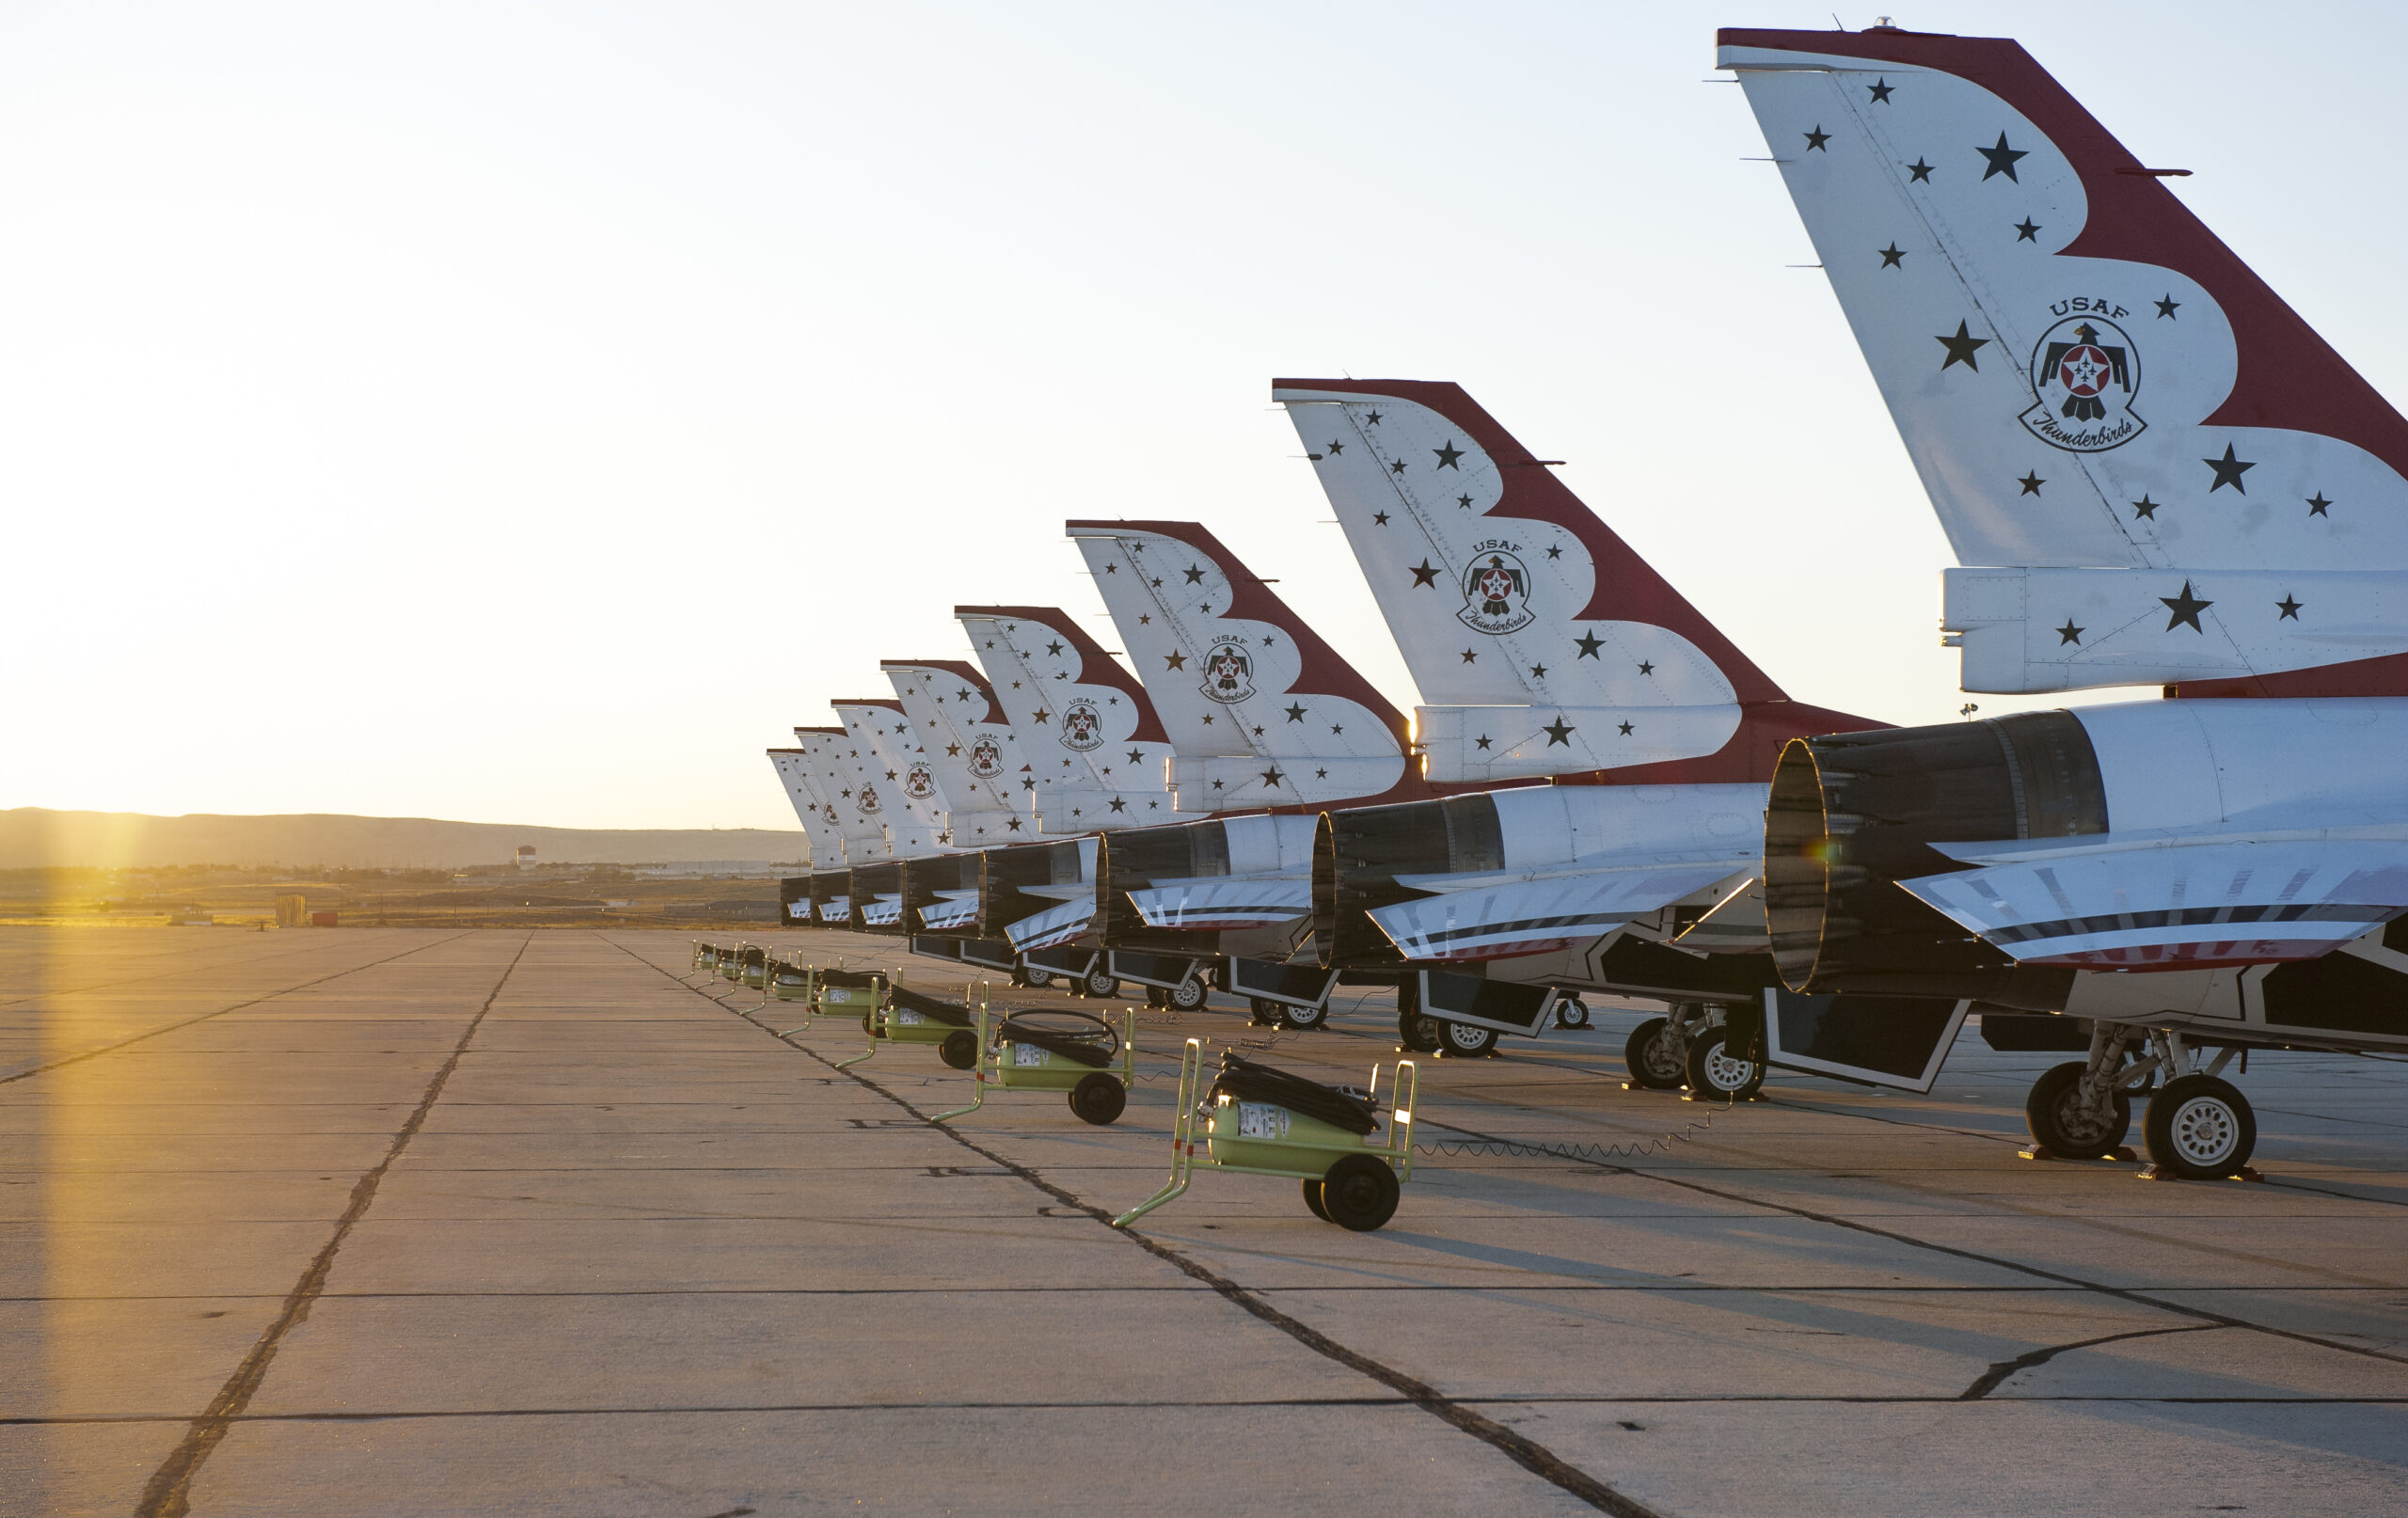 8 jets on a landing strip all parked in a line